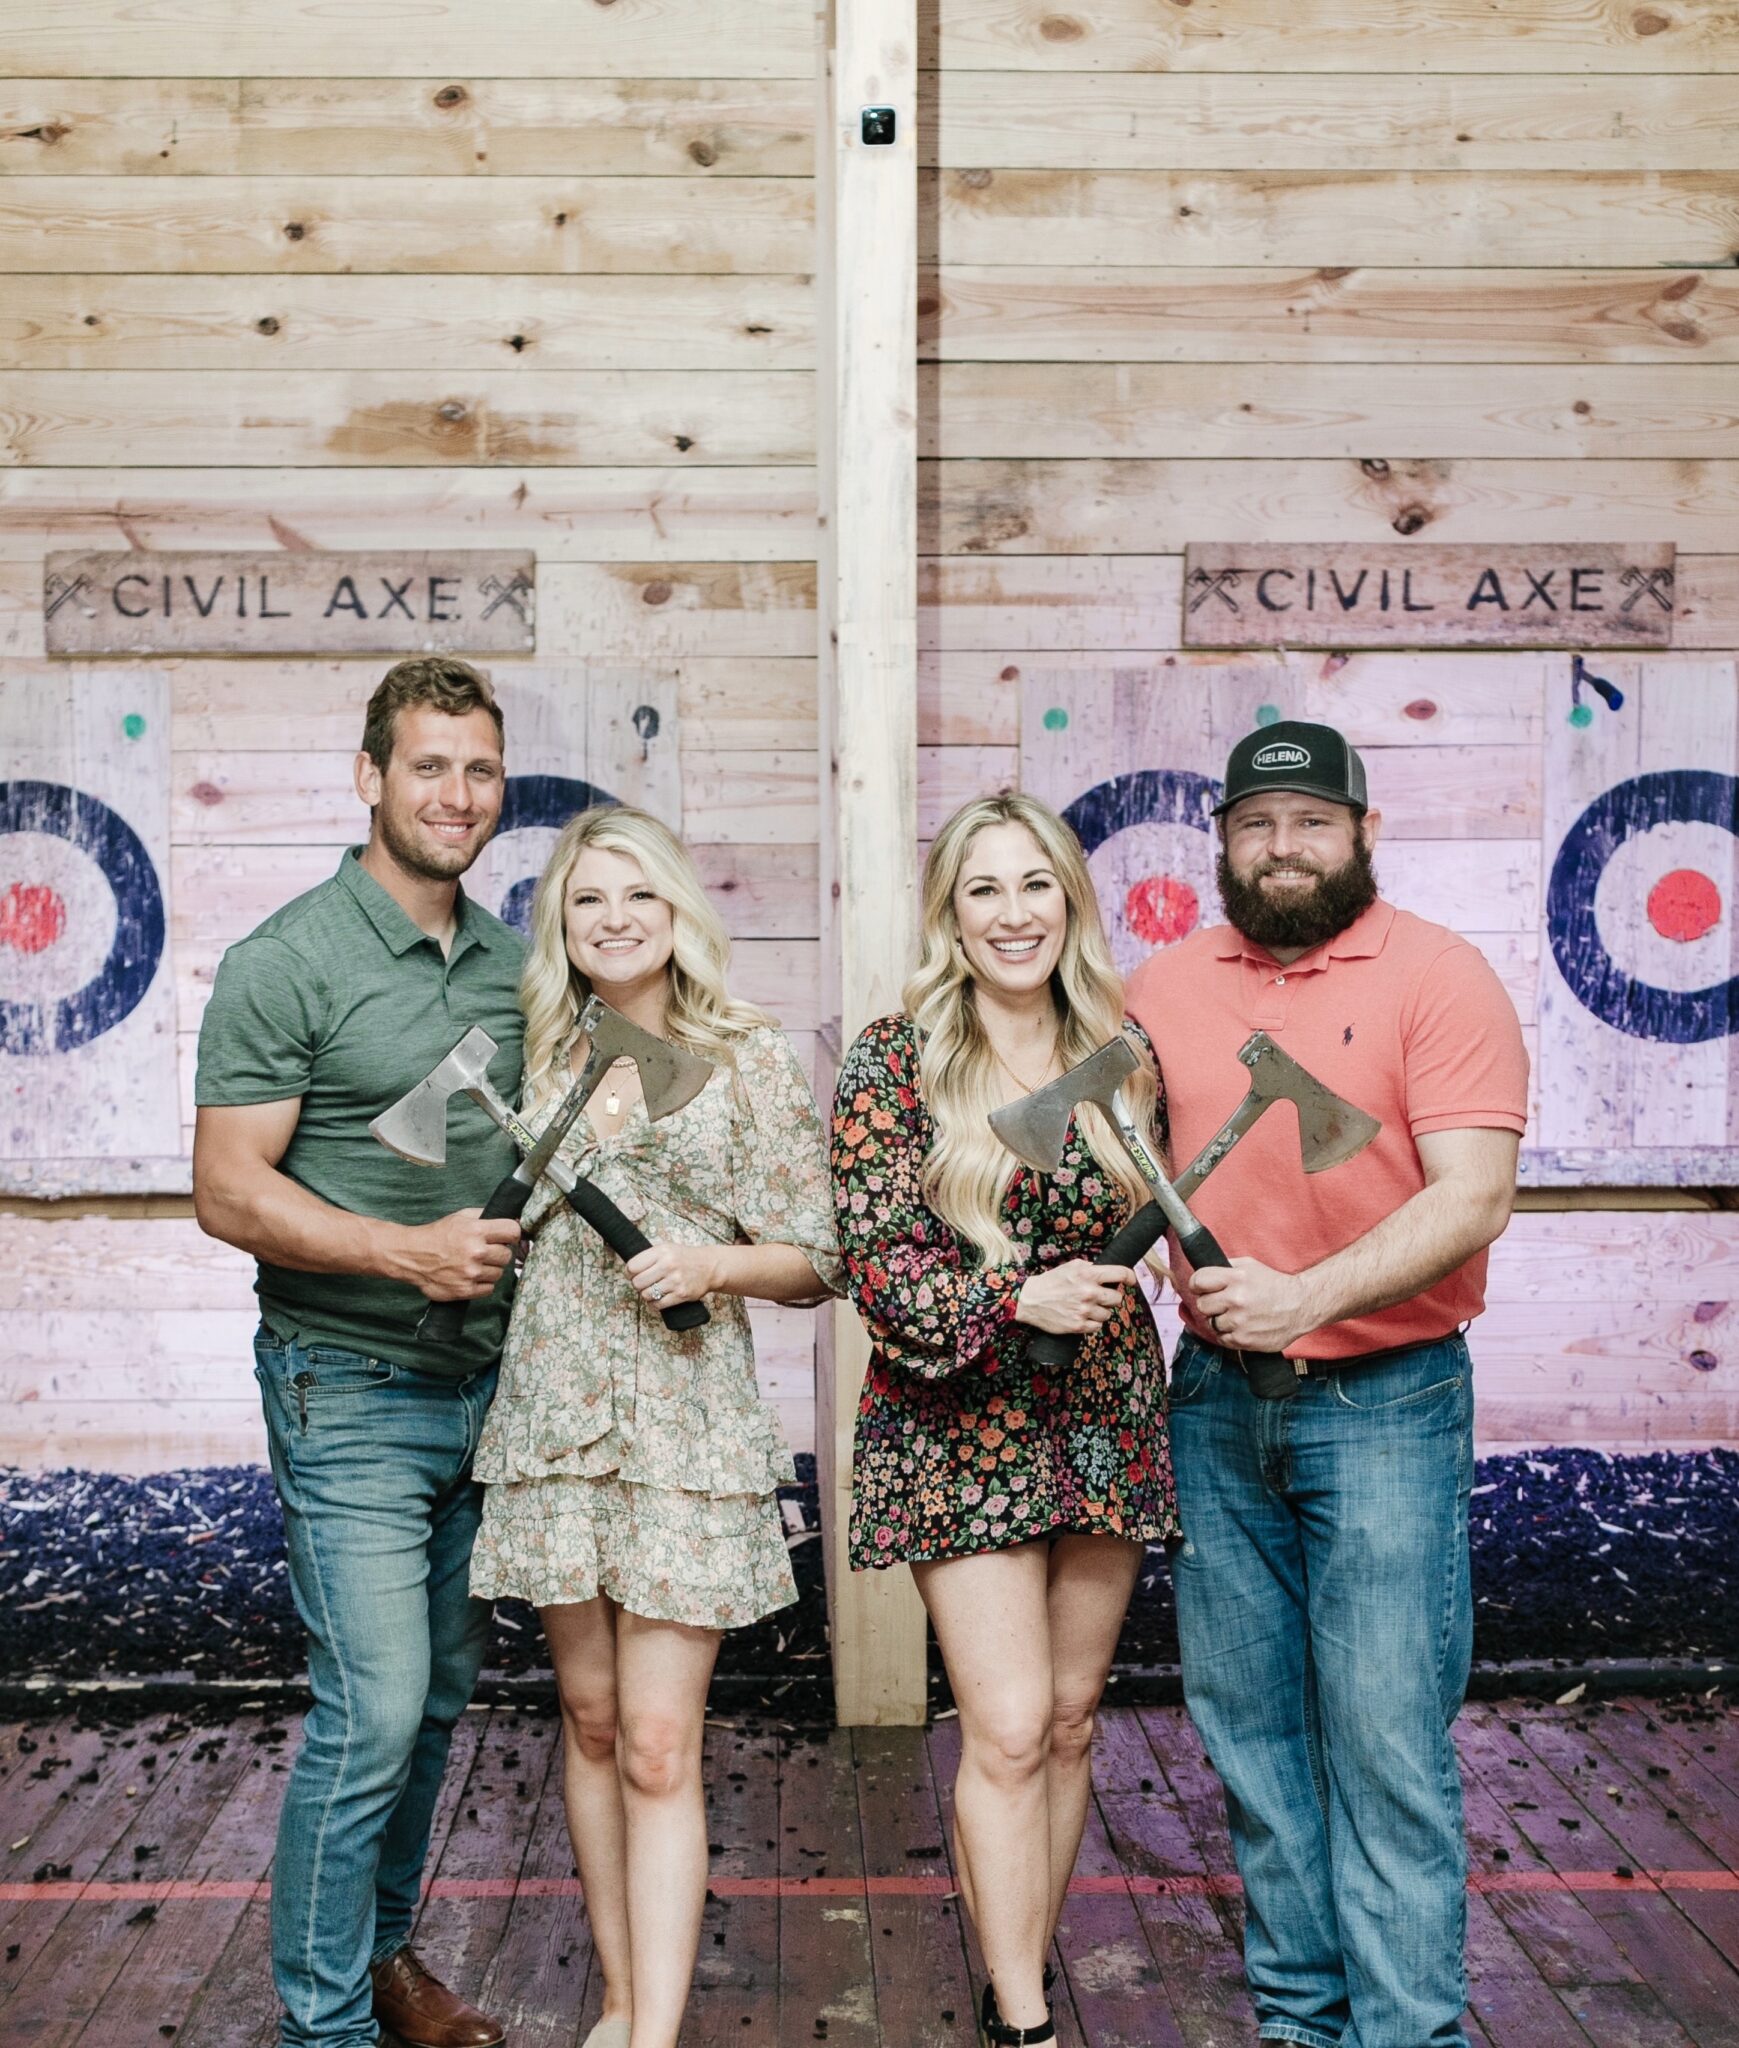 Review of Civil Axe Throwing Downtown Memphis by Walking in Memphis in High Heels.